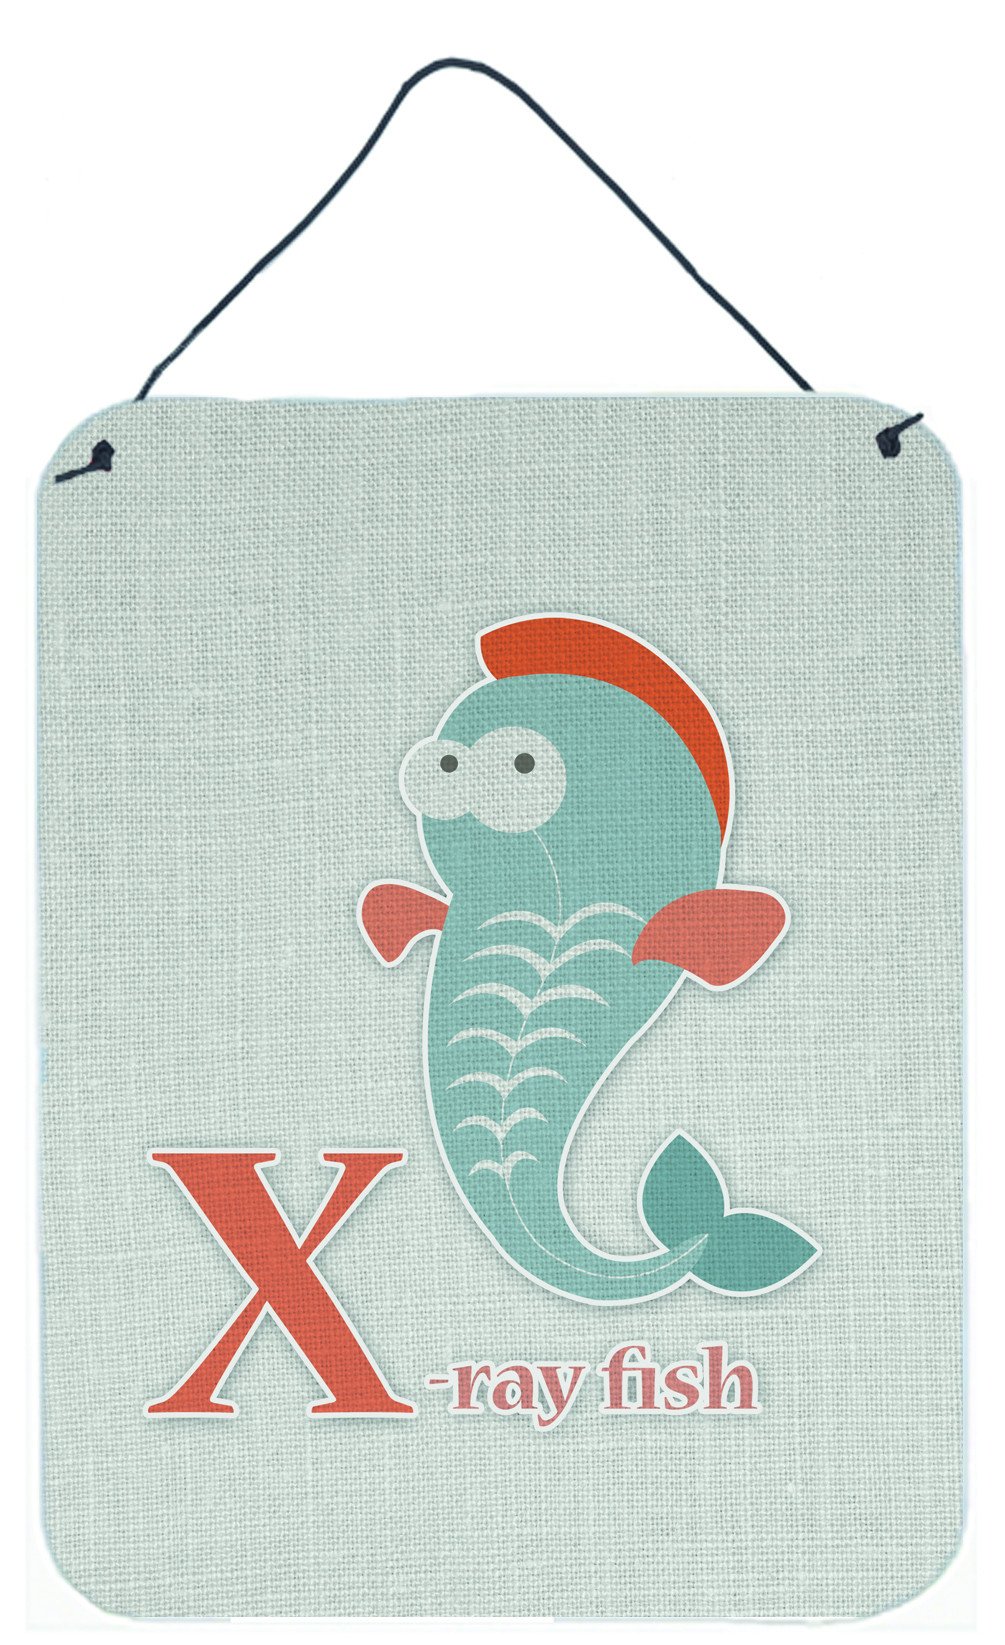 Alphabet X for Xray Fish Wall or Door Hanging Prints BB5749DS1216 by Caroline's Treasures